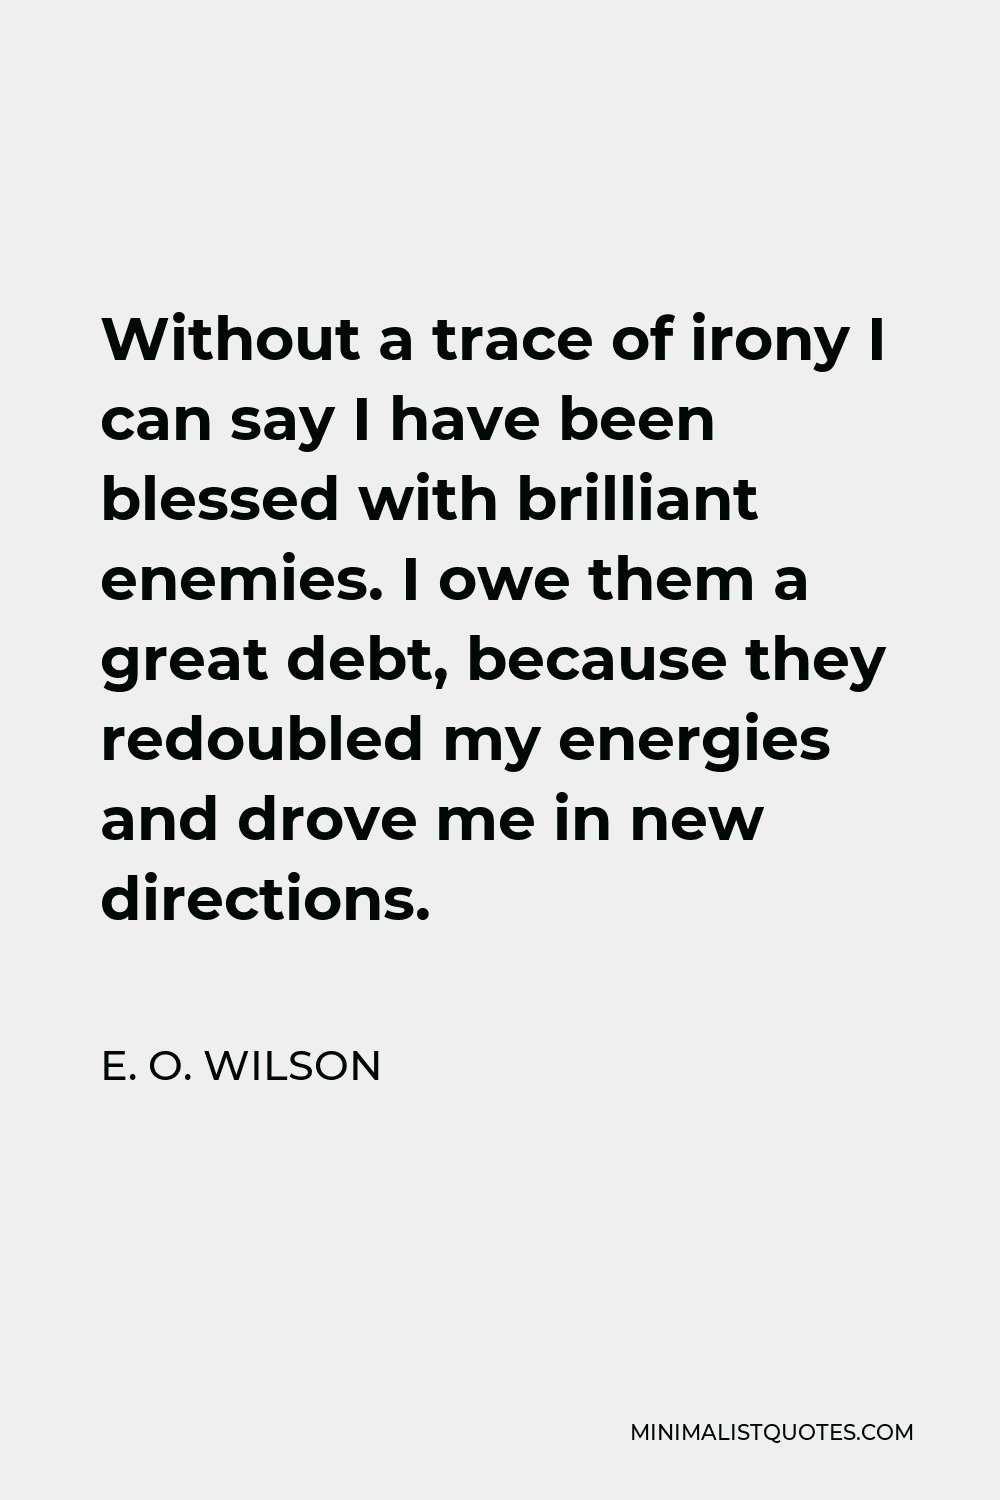 E. O. Wilson Quote - Without a trace of irony I can say I have been blessed with brilliant enemies. I owe them a great debt, because they redoubled my energies and drove me in new directions.